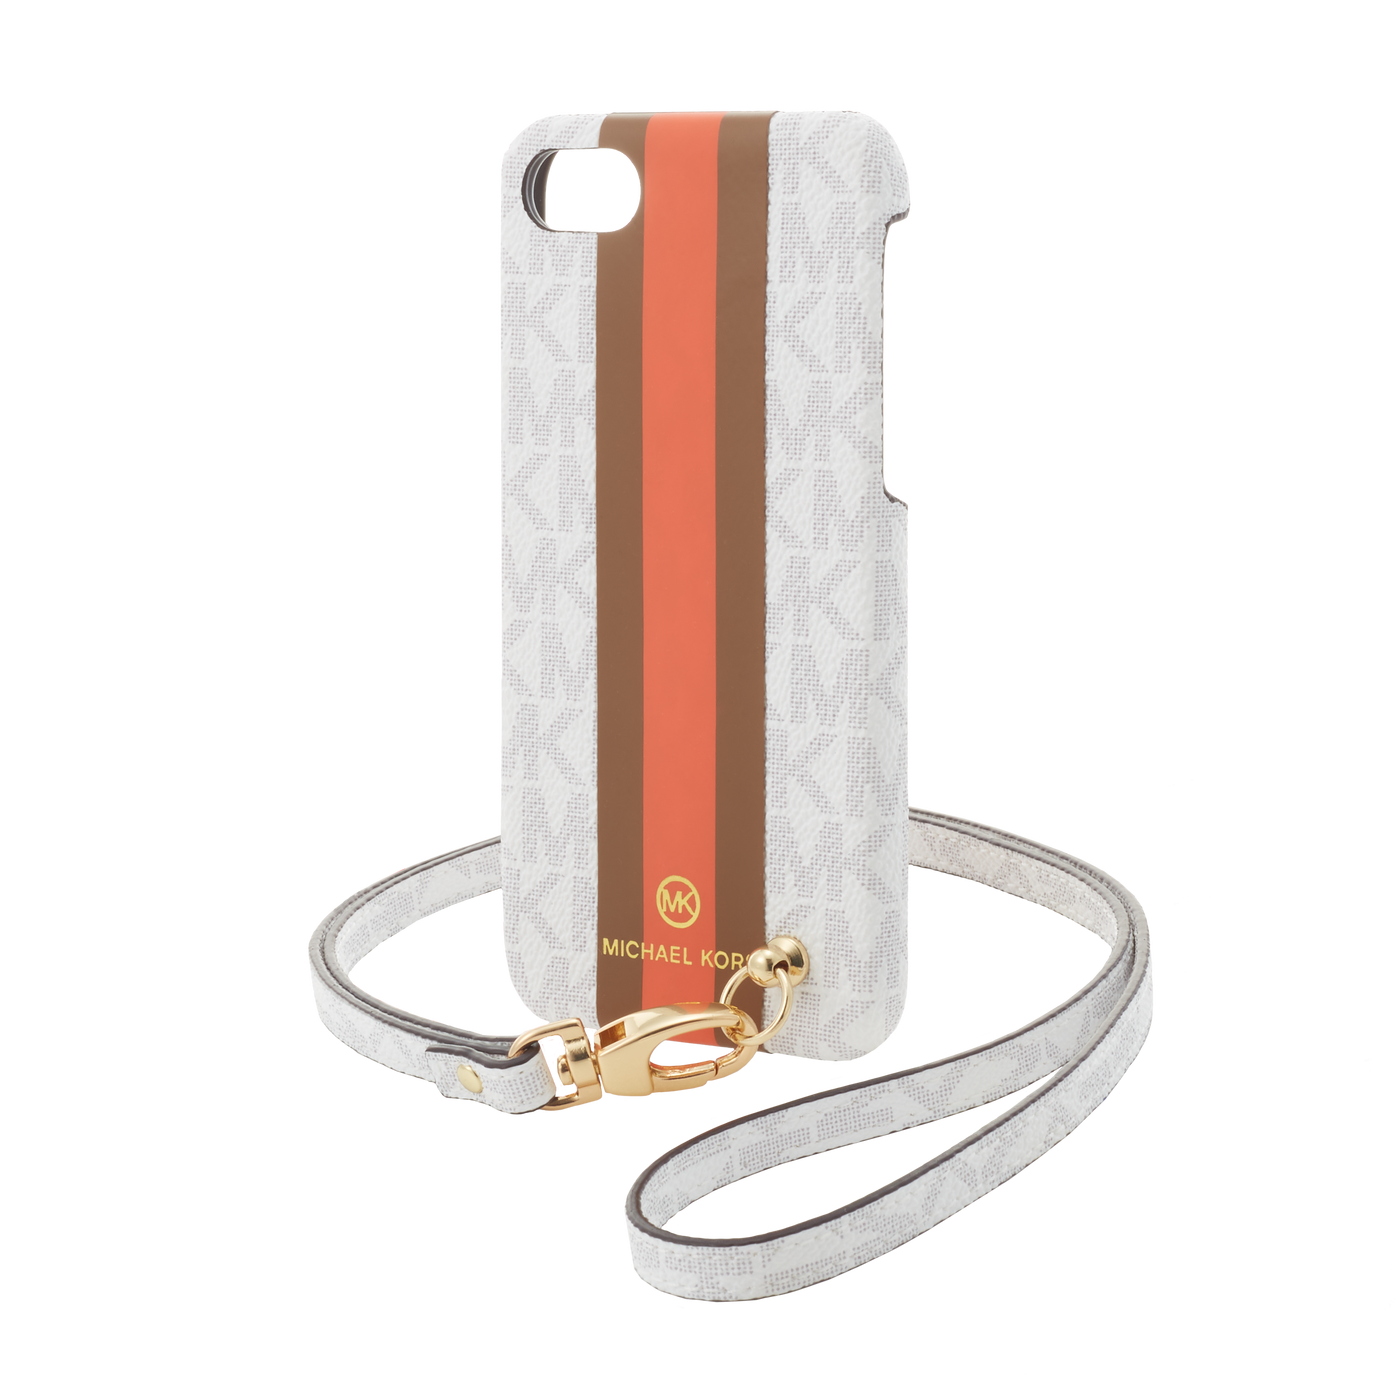 MICHAEL KORS - Slim Wrap Case Stripe with Neck Strap - for iPhone SE 第2世代 - Bright White